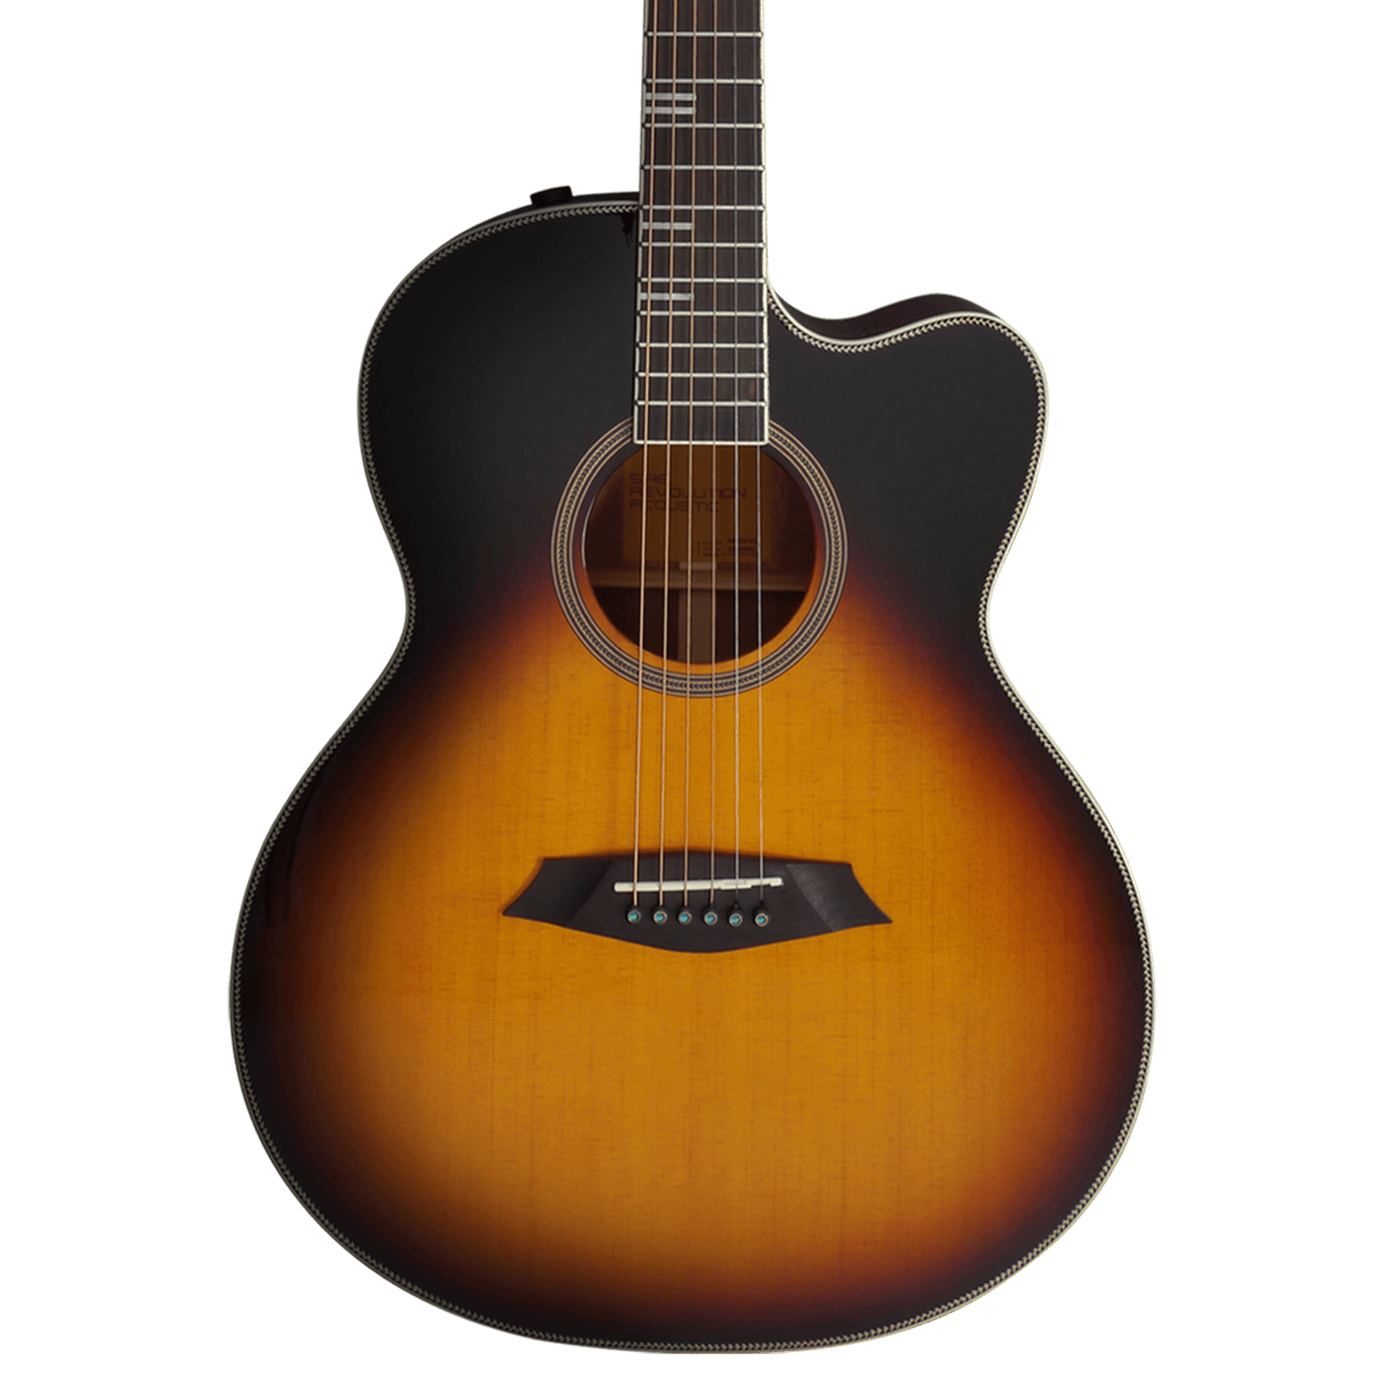 Sire A4-G Vintage Sunburst - $799990 - Gearhub - The upgraded Sire acoustic guitar is brimming with design and features meeting the quality standard of Larry Carlton. The A4 has two body shapes - Dreadnought and Grand Auditorium. More than the comfort from the rolled fretboard edges, the added solid Mahogany back plate makes the acoustic guitar more worth than its value. Cuerpo • Modelo: Larry Carlton A4-G (Grand Auditorium)• Top: Roasted Solid Spruce• Sides: Mahogany• Top: Solid Mahogany • Terminación: Pol